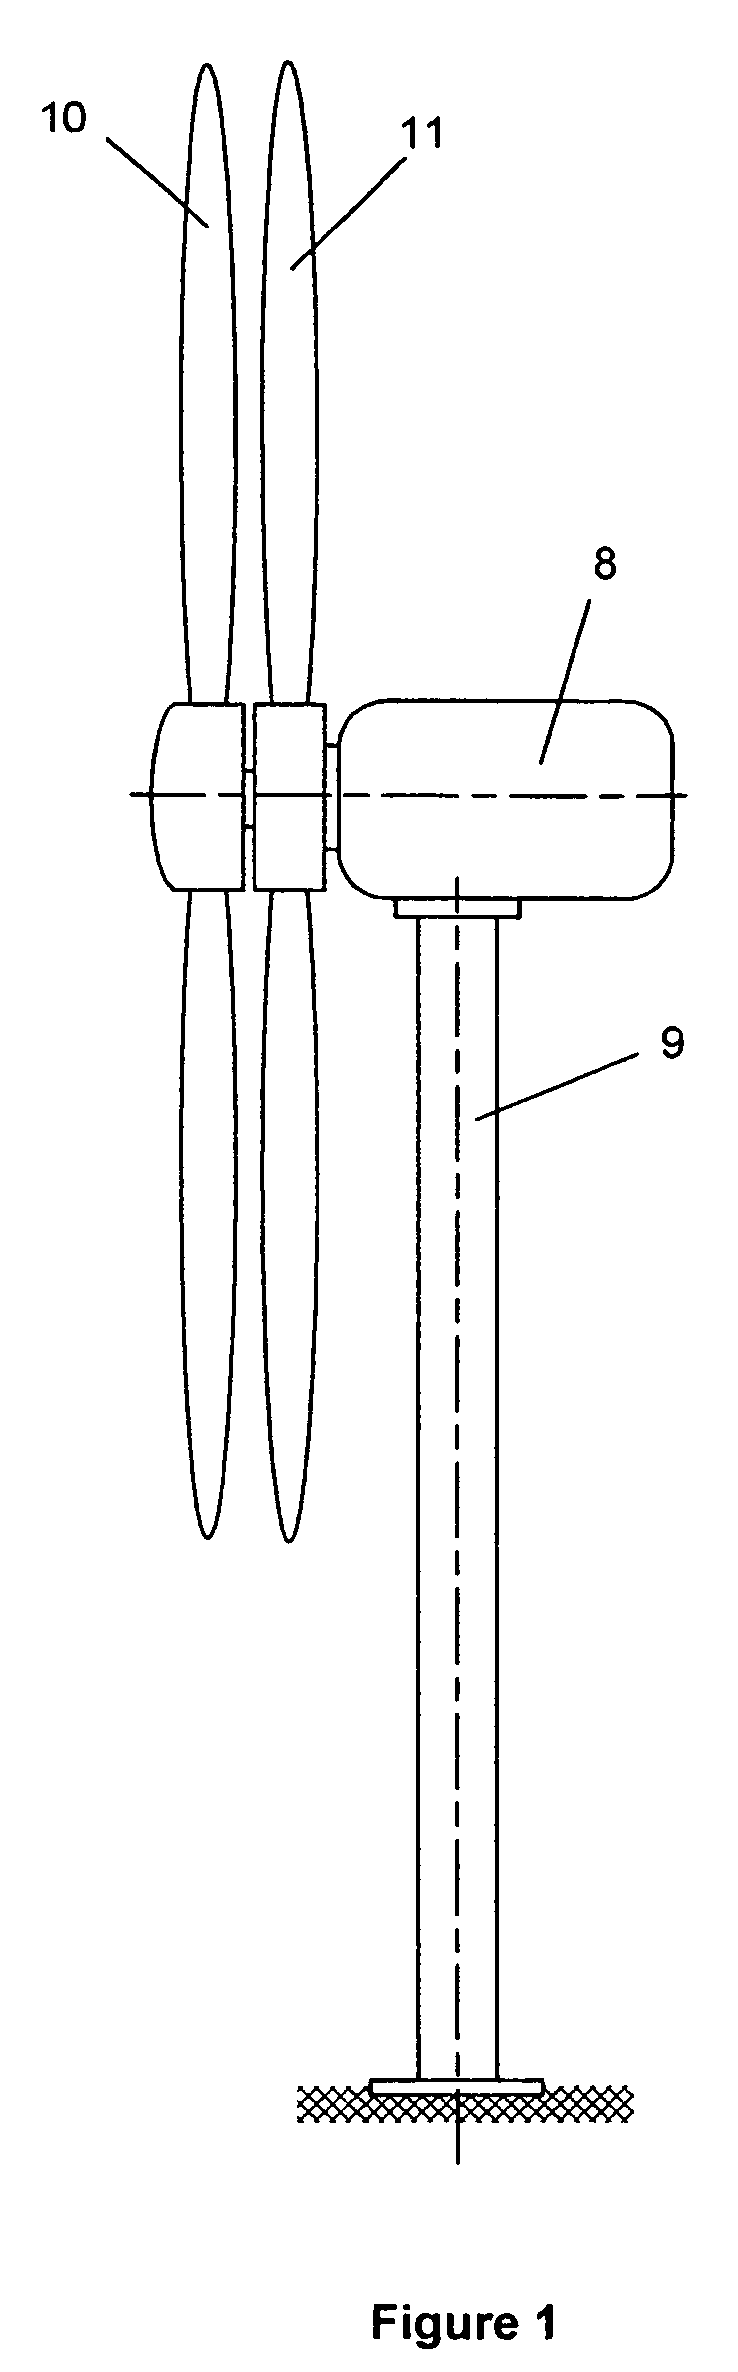 Drive device for a windmill provided with two counter-rotative propellers